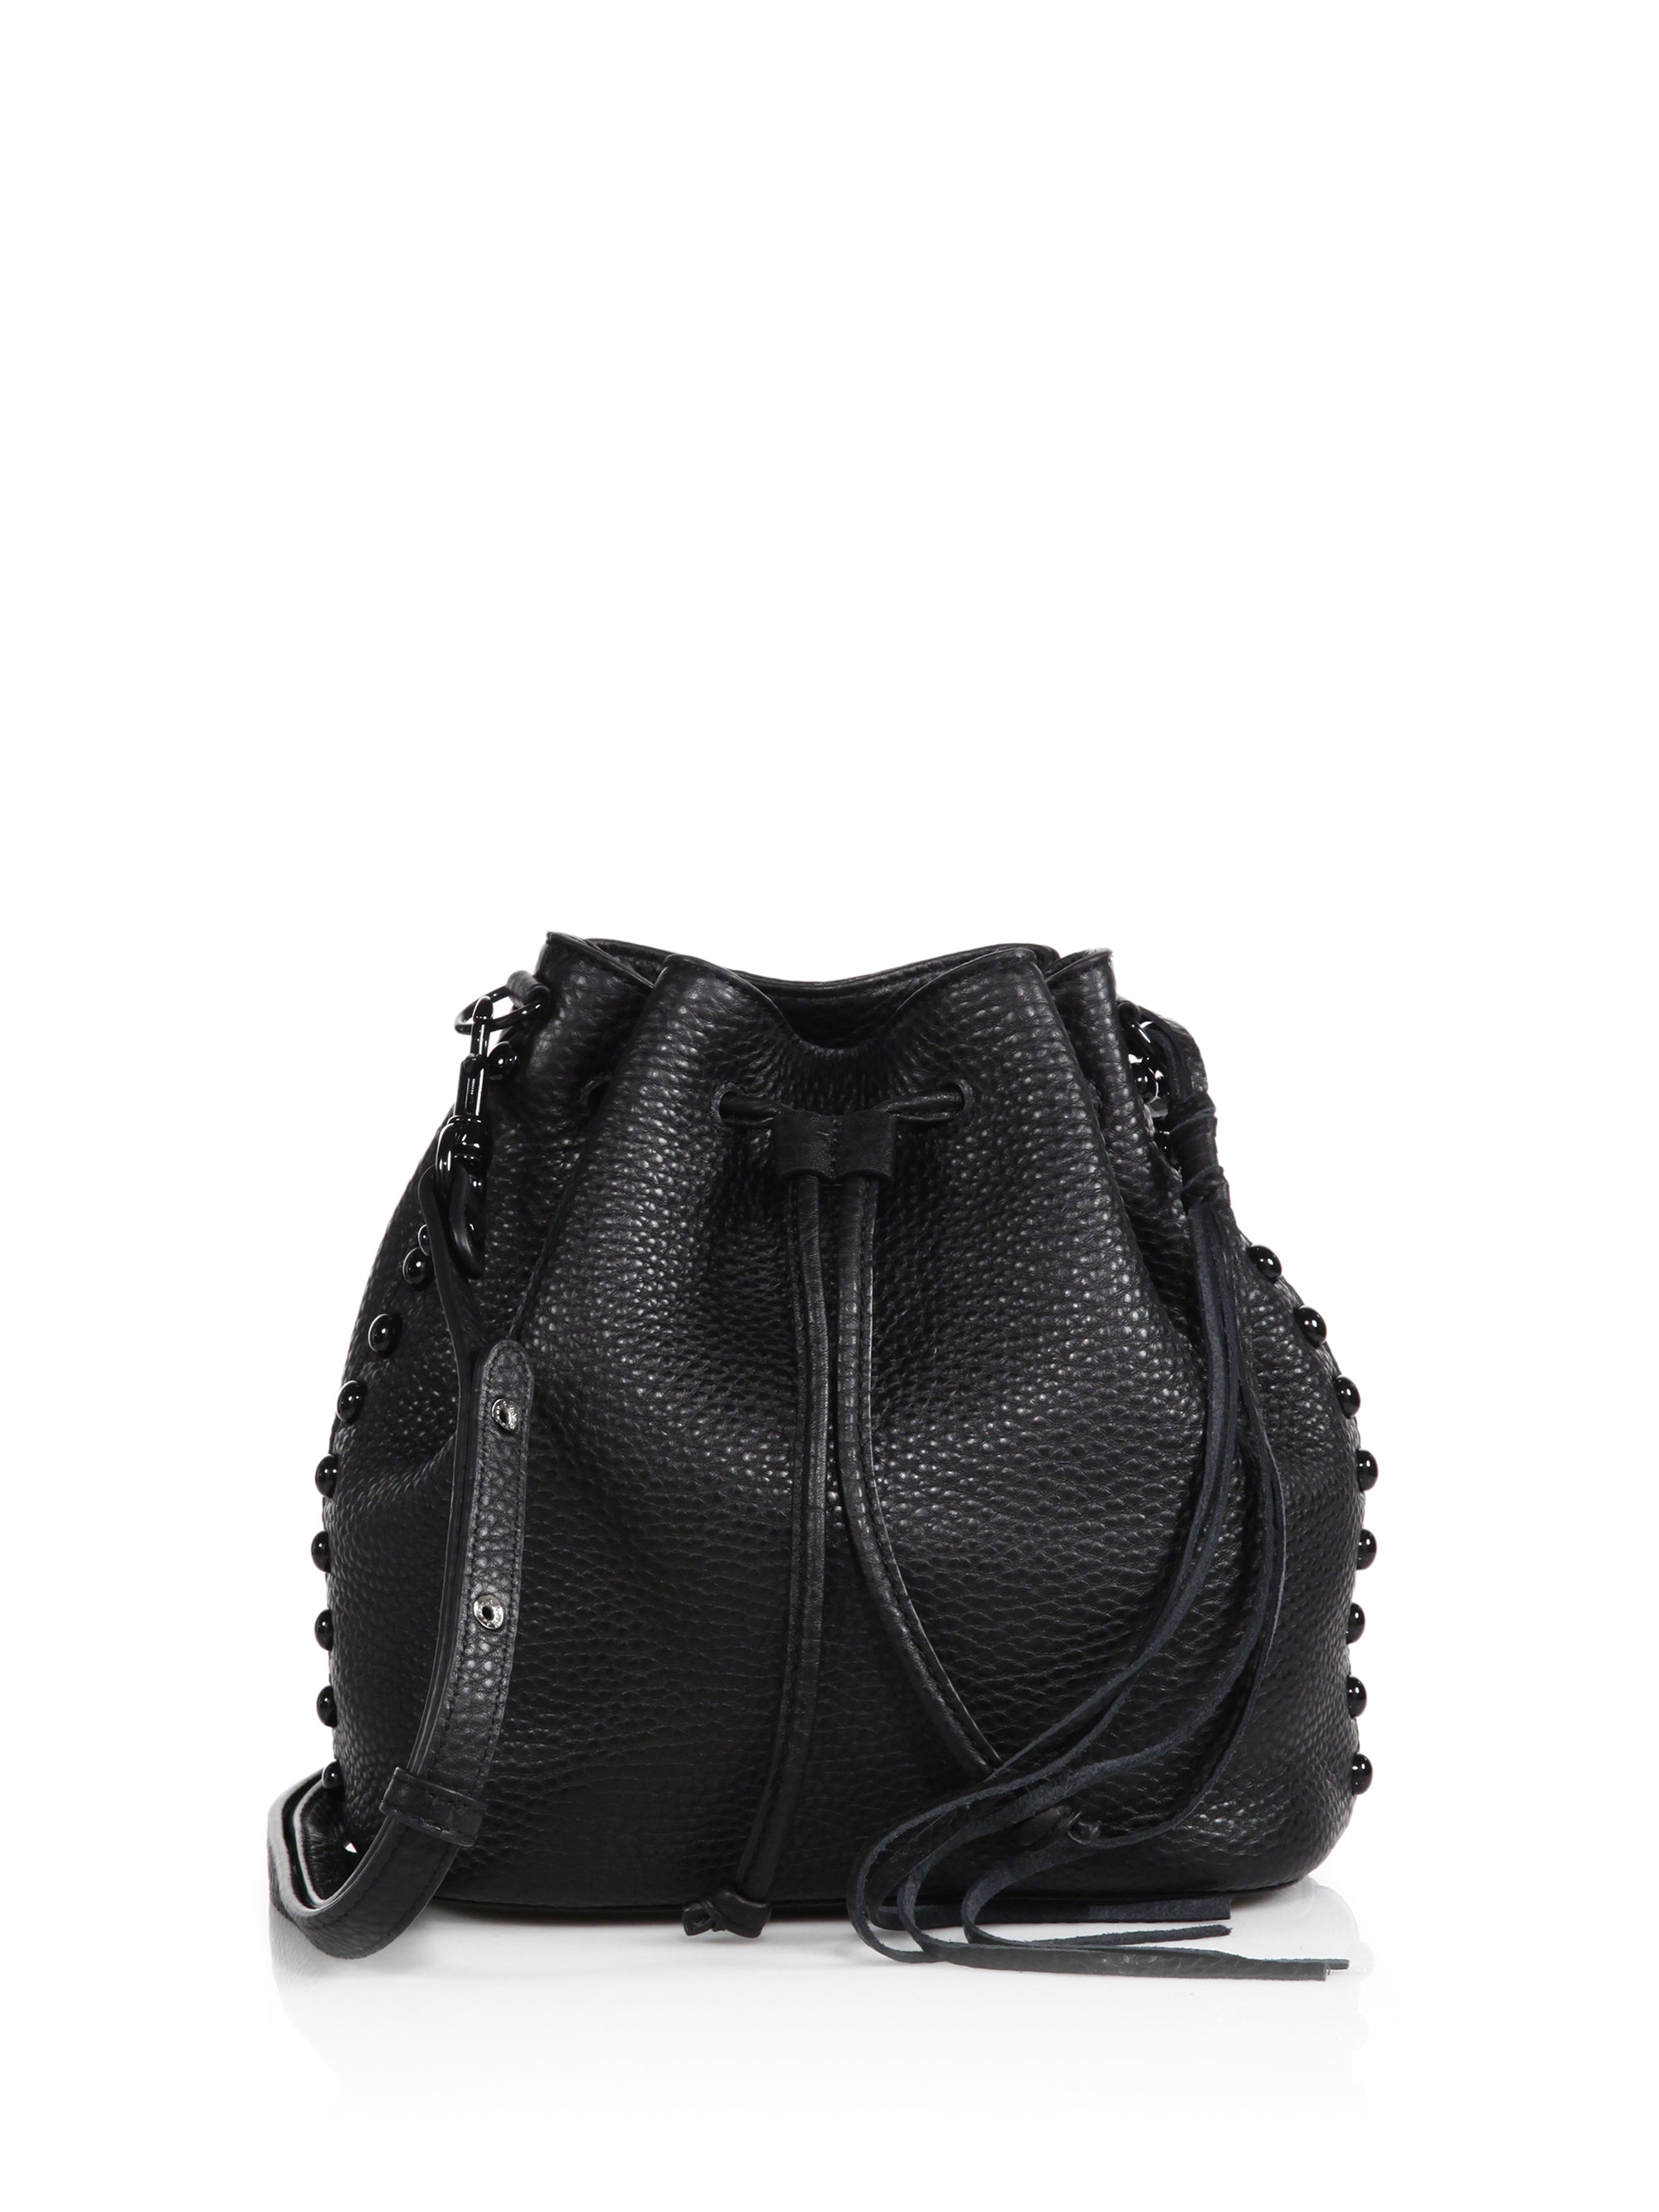 Rebecca Minkoff Studded Leather Bucket Bag in Black | Lyst